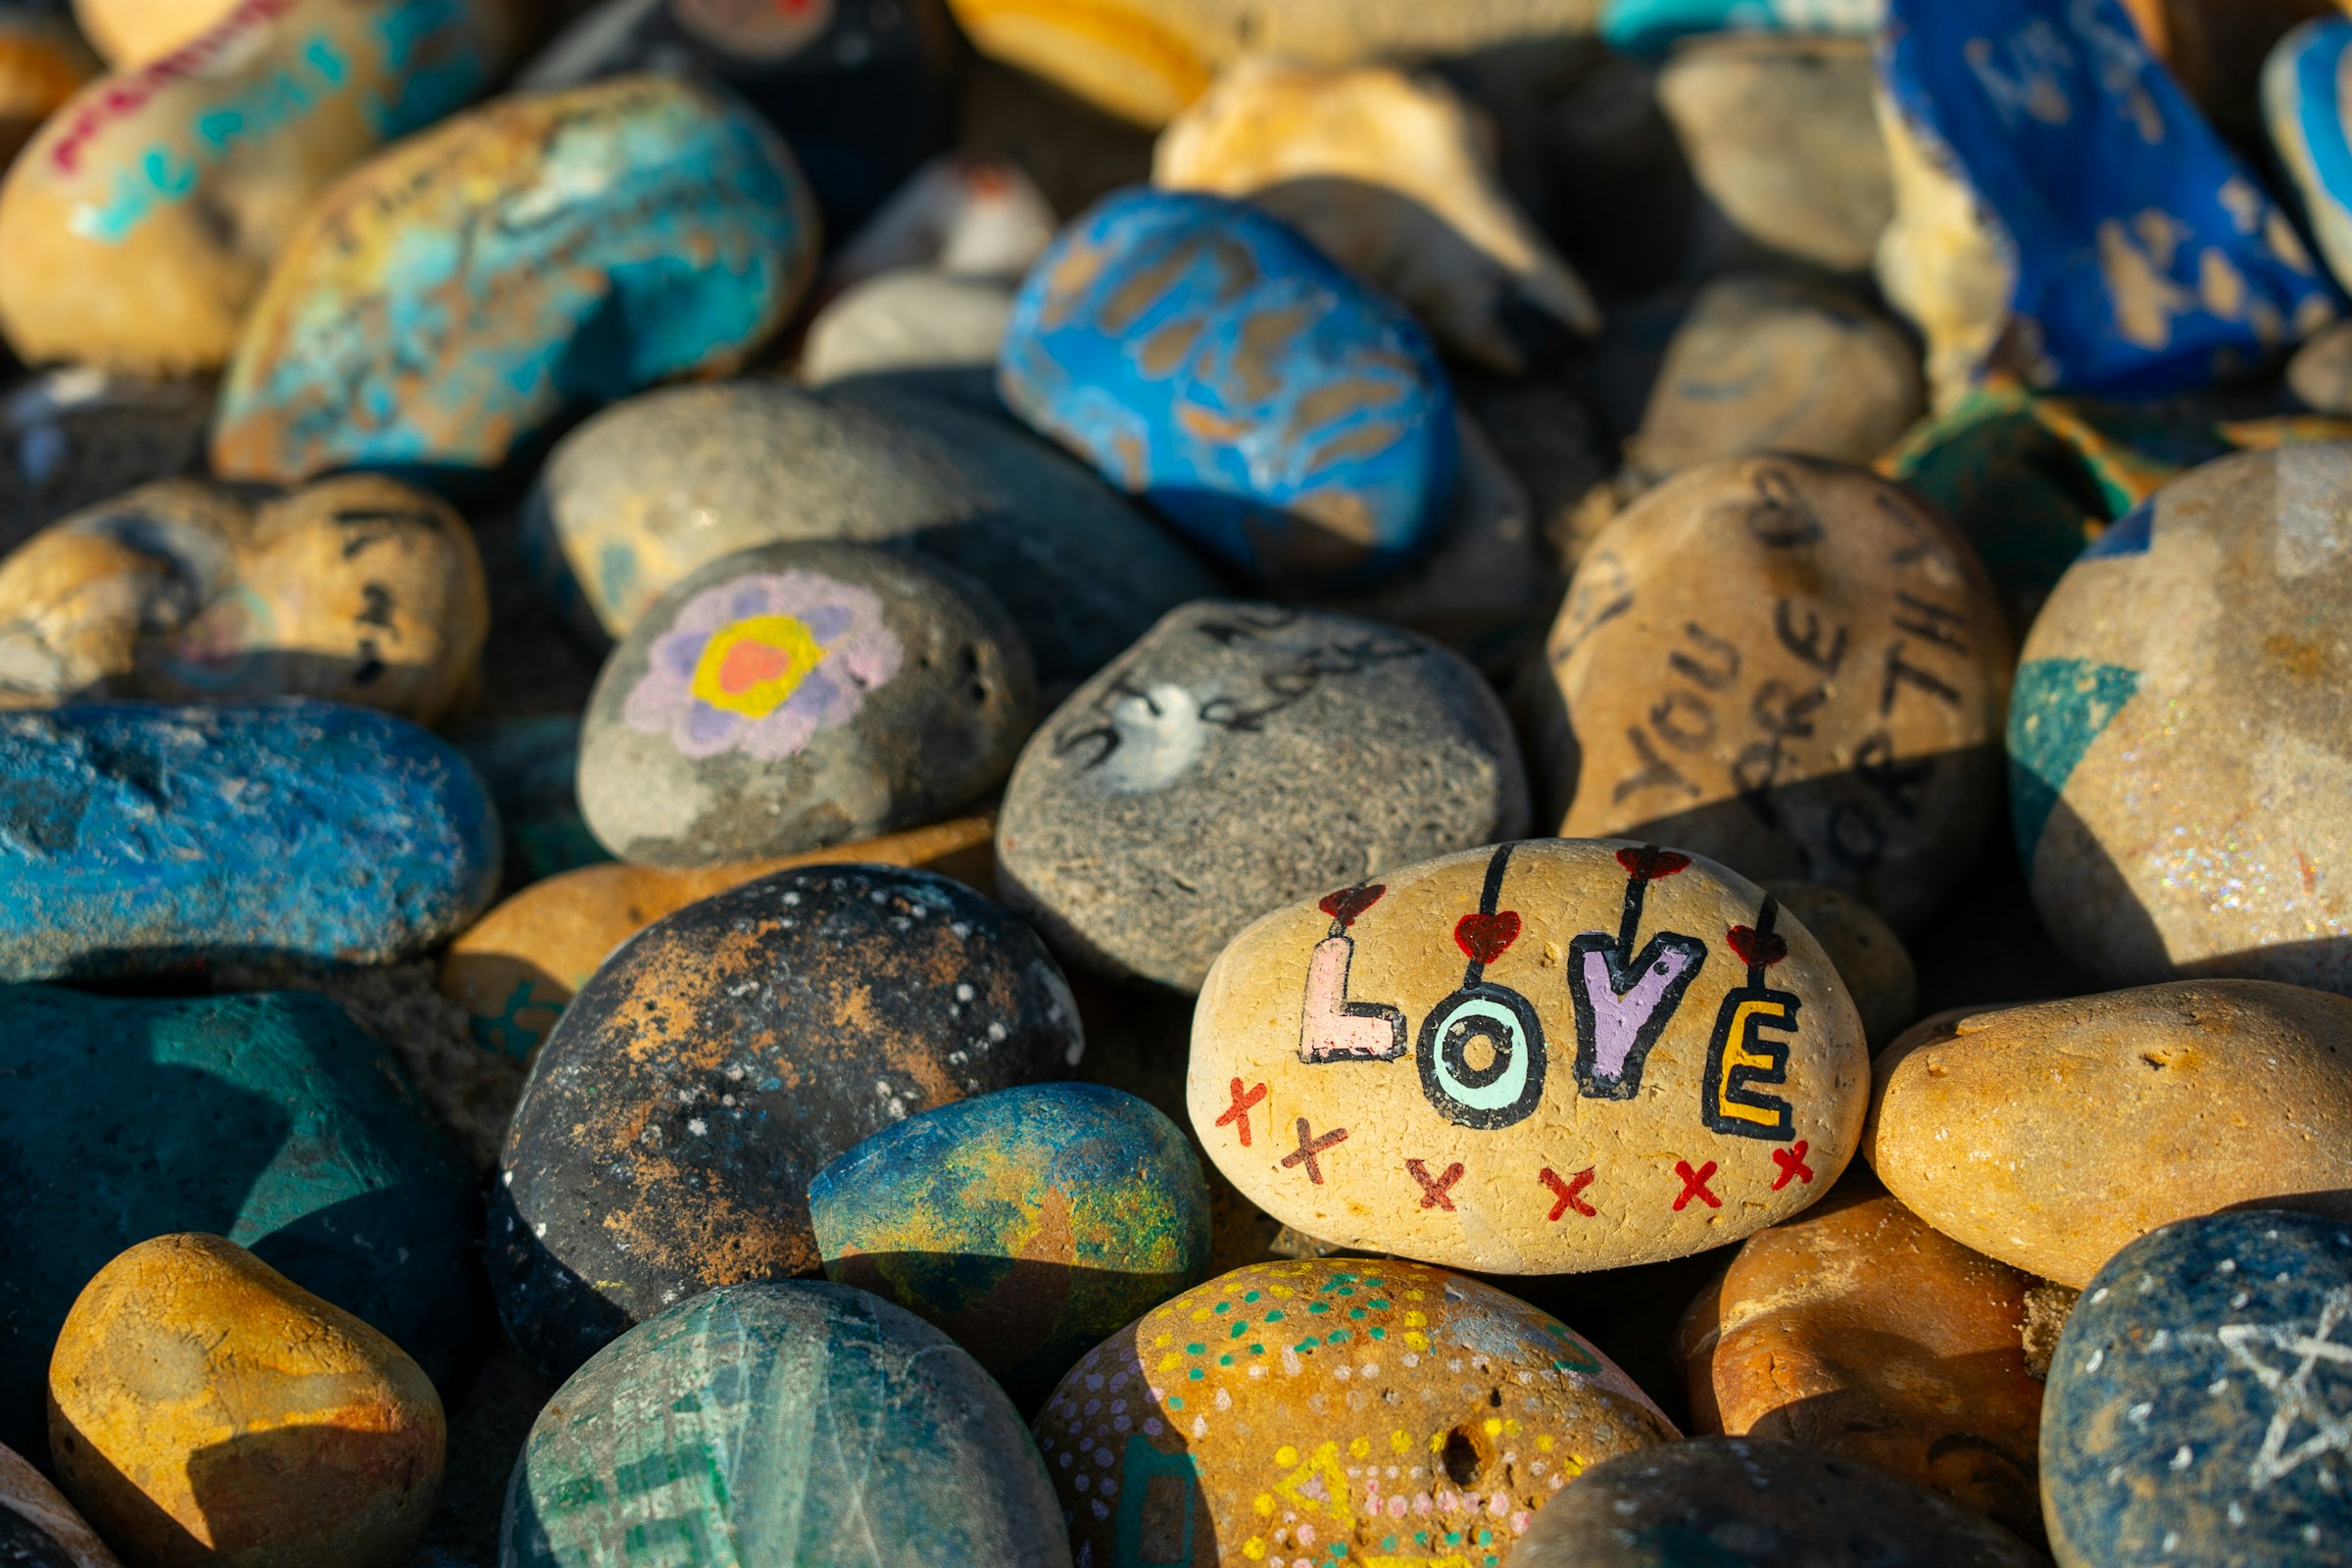 Image of painted rocks from Unsplash.com